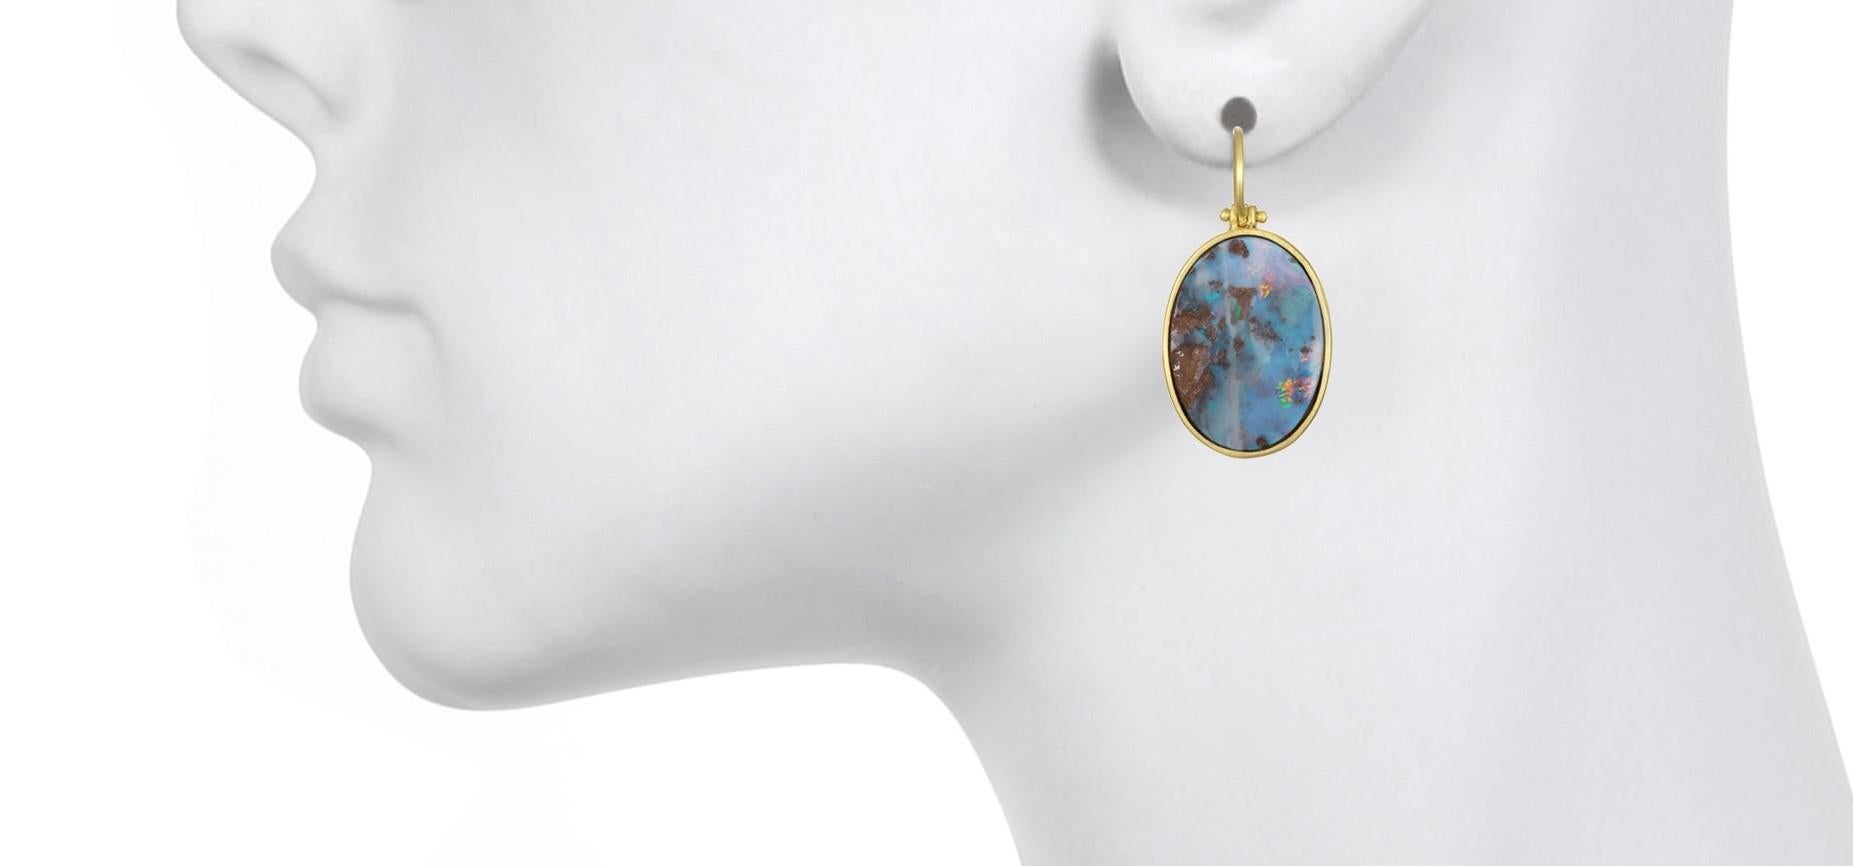 Unique in every way.  These fine natural Boulder Opal split earrings are expertly set in 18k gold bezels with hinged earwire for movement.  The intense and deep color is highlighted throughout the full carat weight of 16.45.  Organic feel, matte